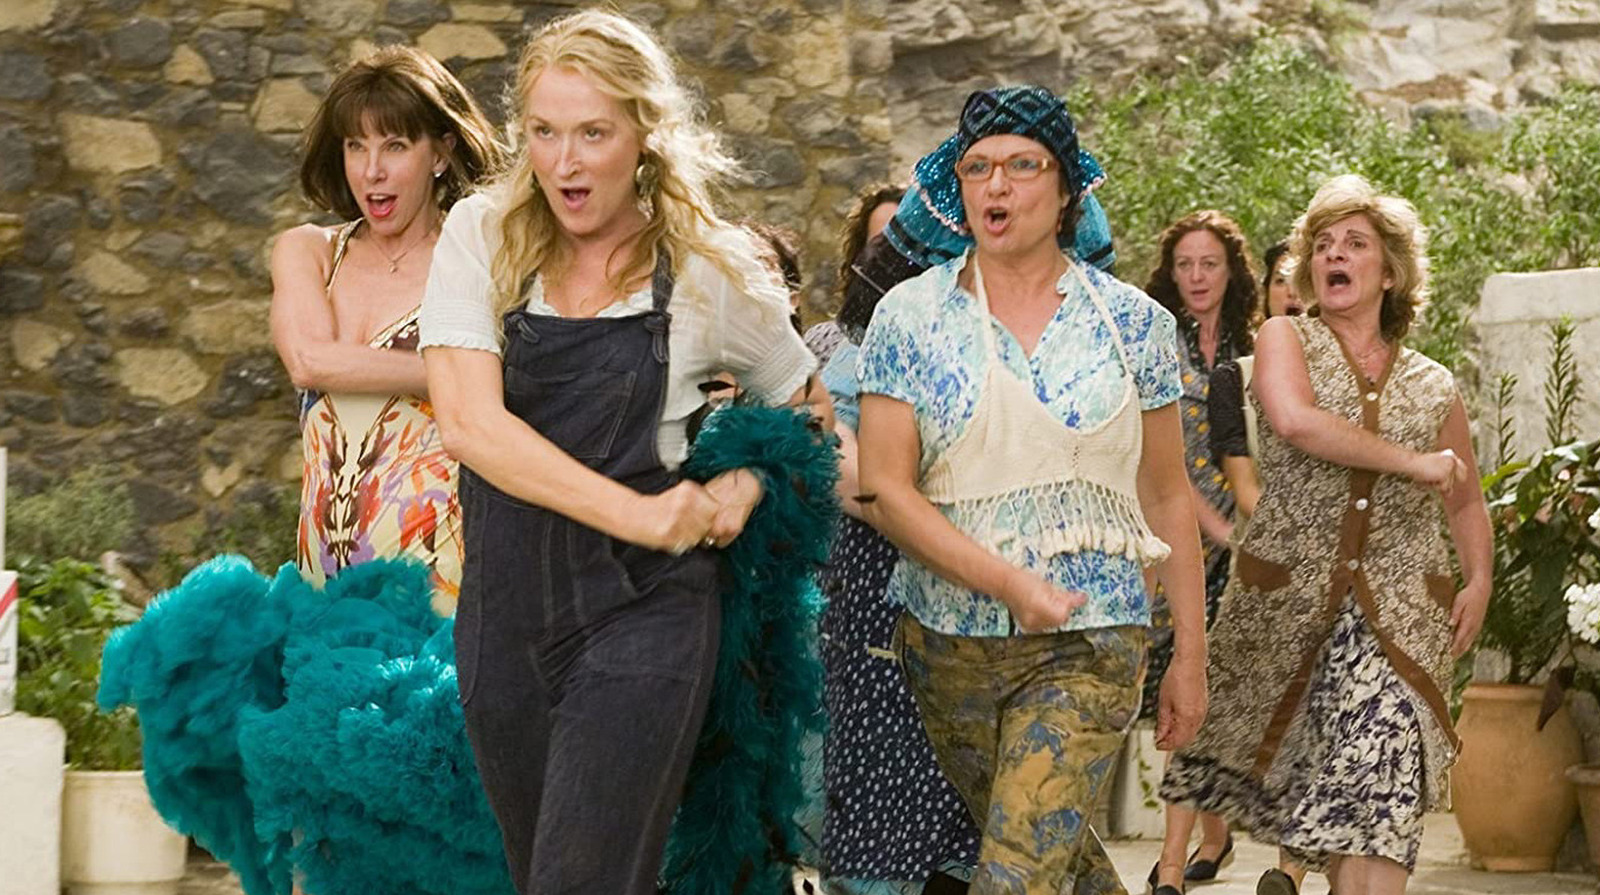 Is Mamma Mia 3 Happening, Or Will The Franchise Leave Us